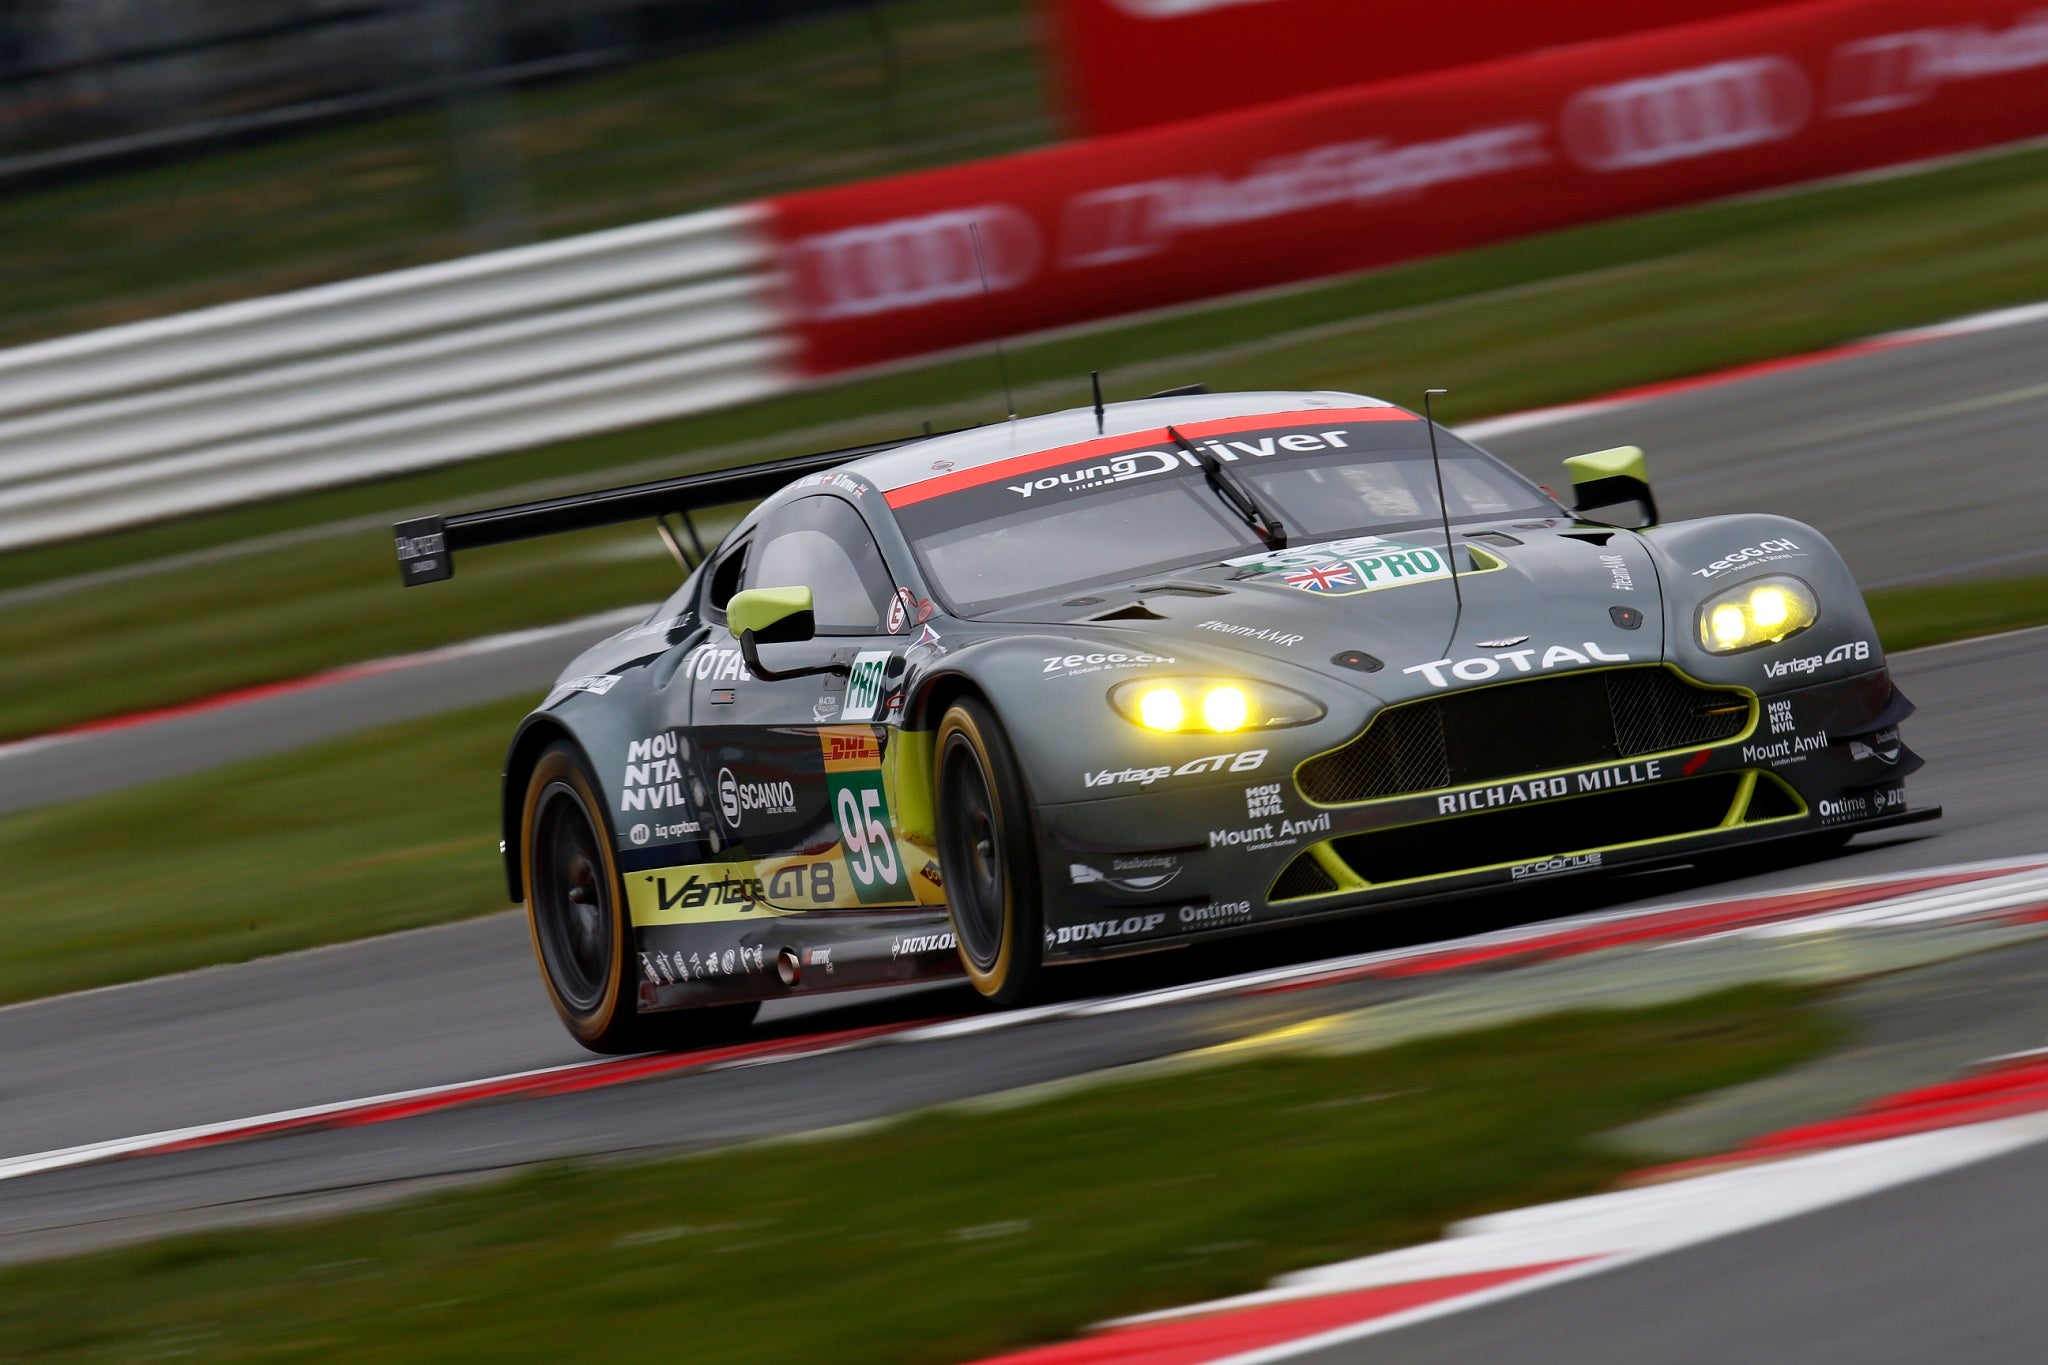 The No 95 Aston Martin Racing V8 Vantage finished third in GTE Pro